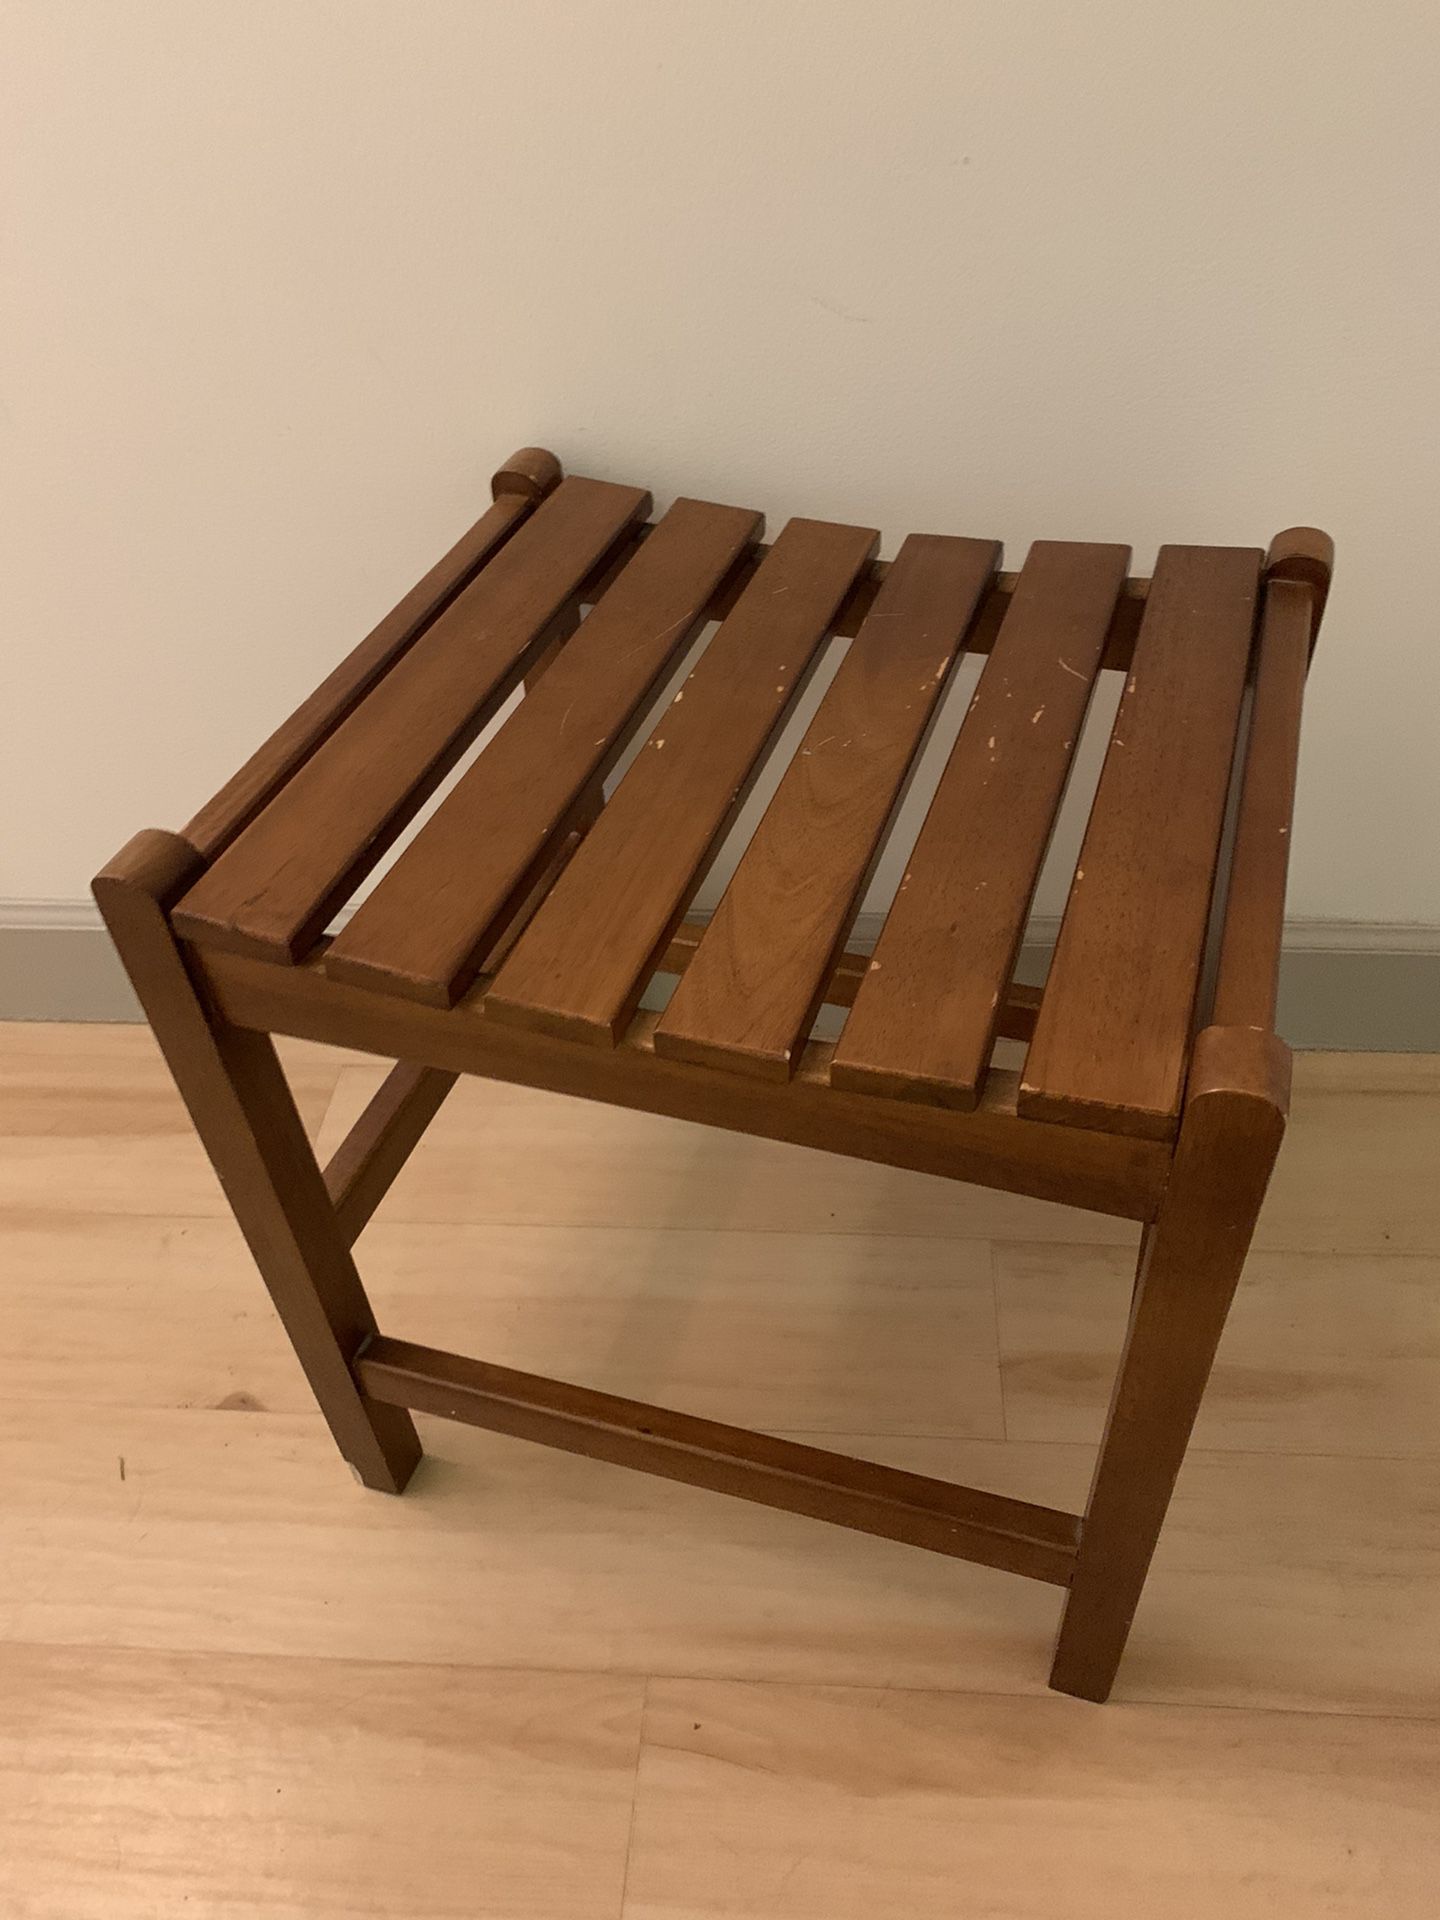 Wood Stool Or Plant Stand 